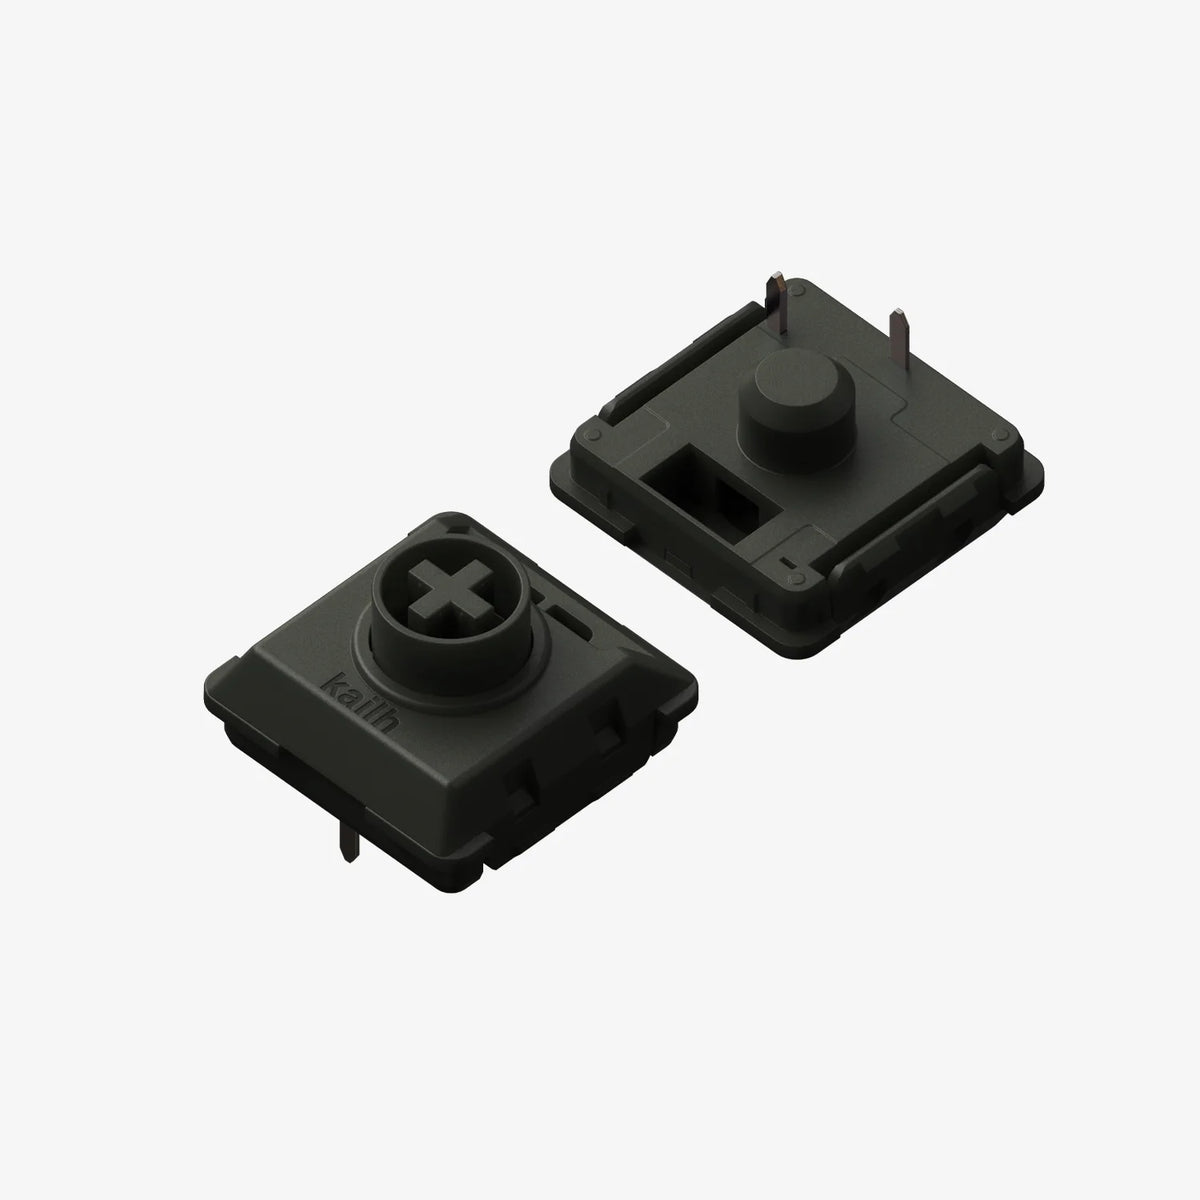 LOFREE x KAILH Full POM Low Profile Switches - 90pcs